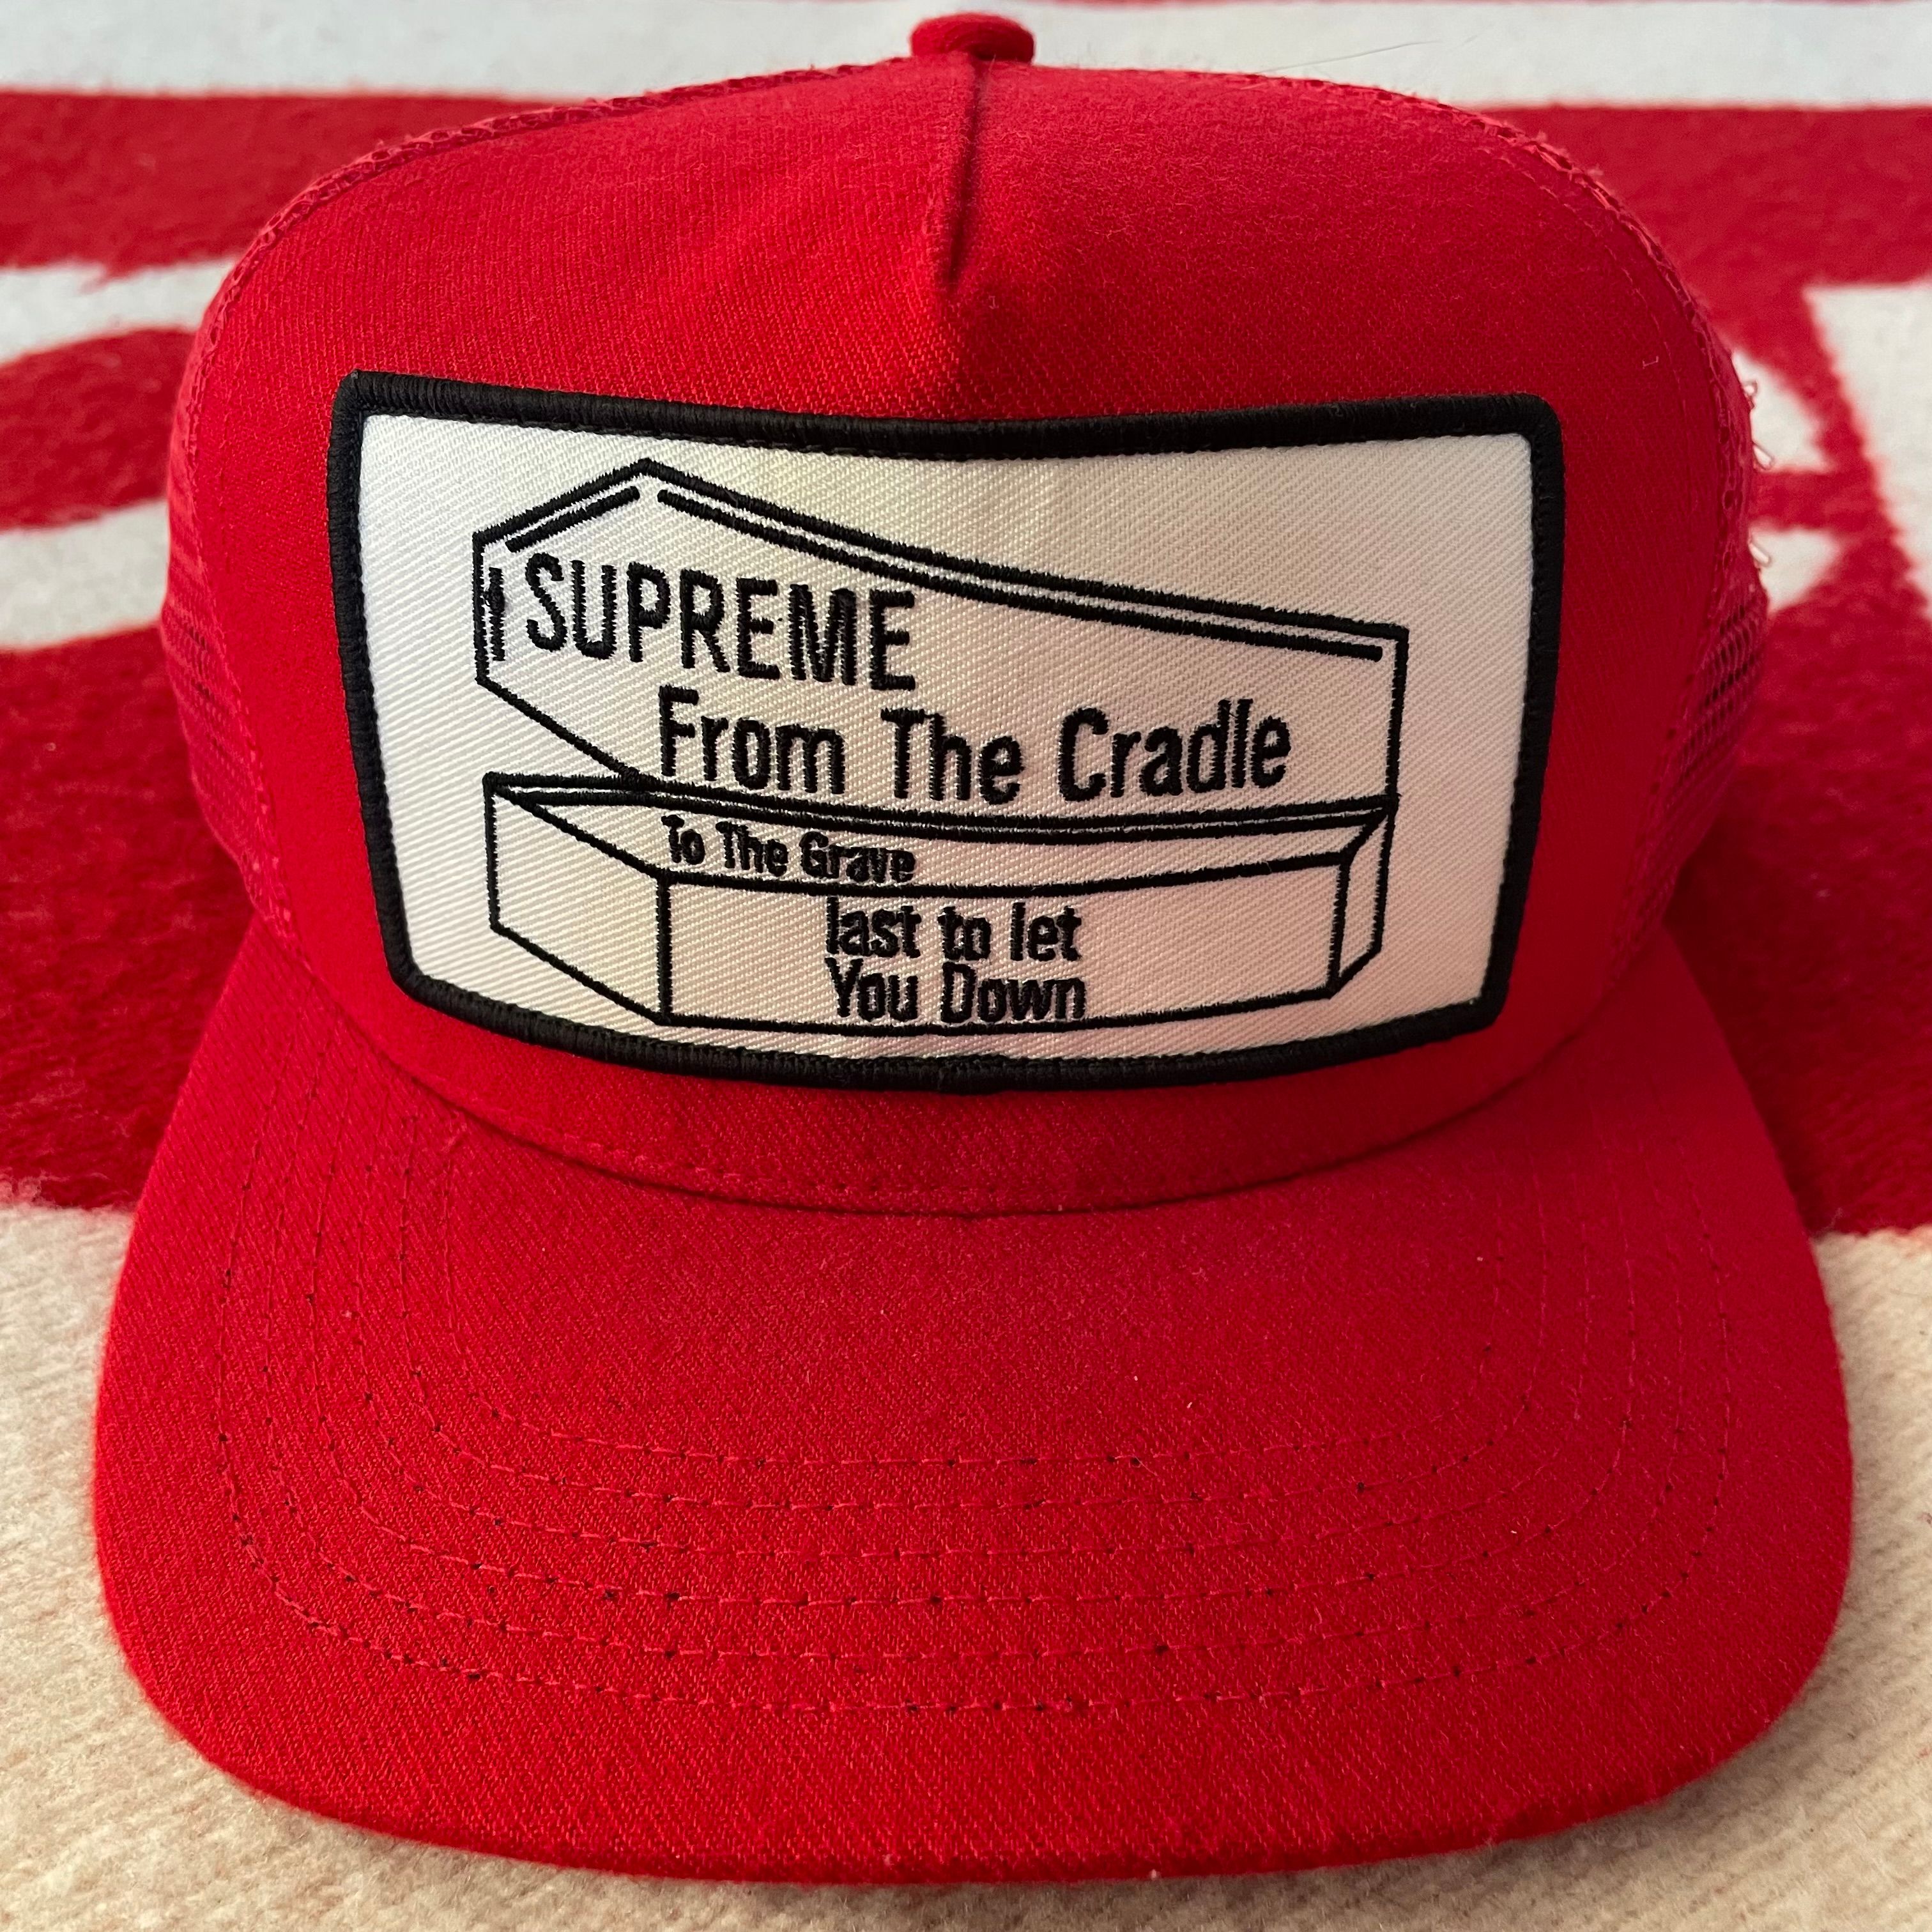 Pre-owned Supreme Coffin Cradle To Grave Cap 5 Panel Hat Trucker Snapback In Red